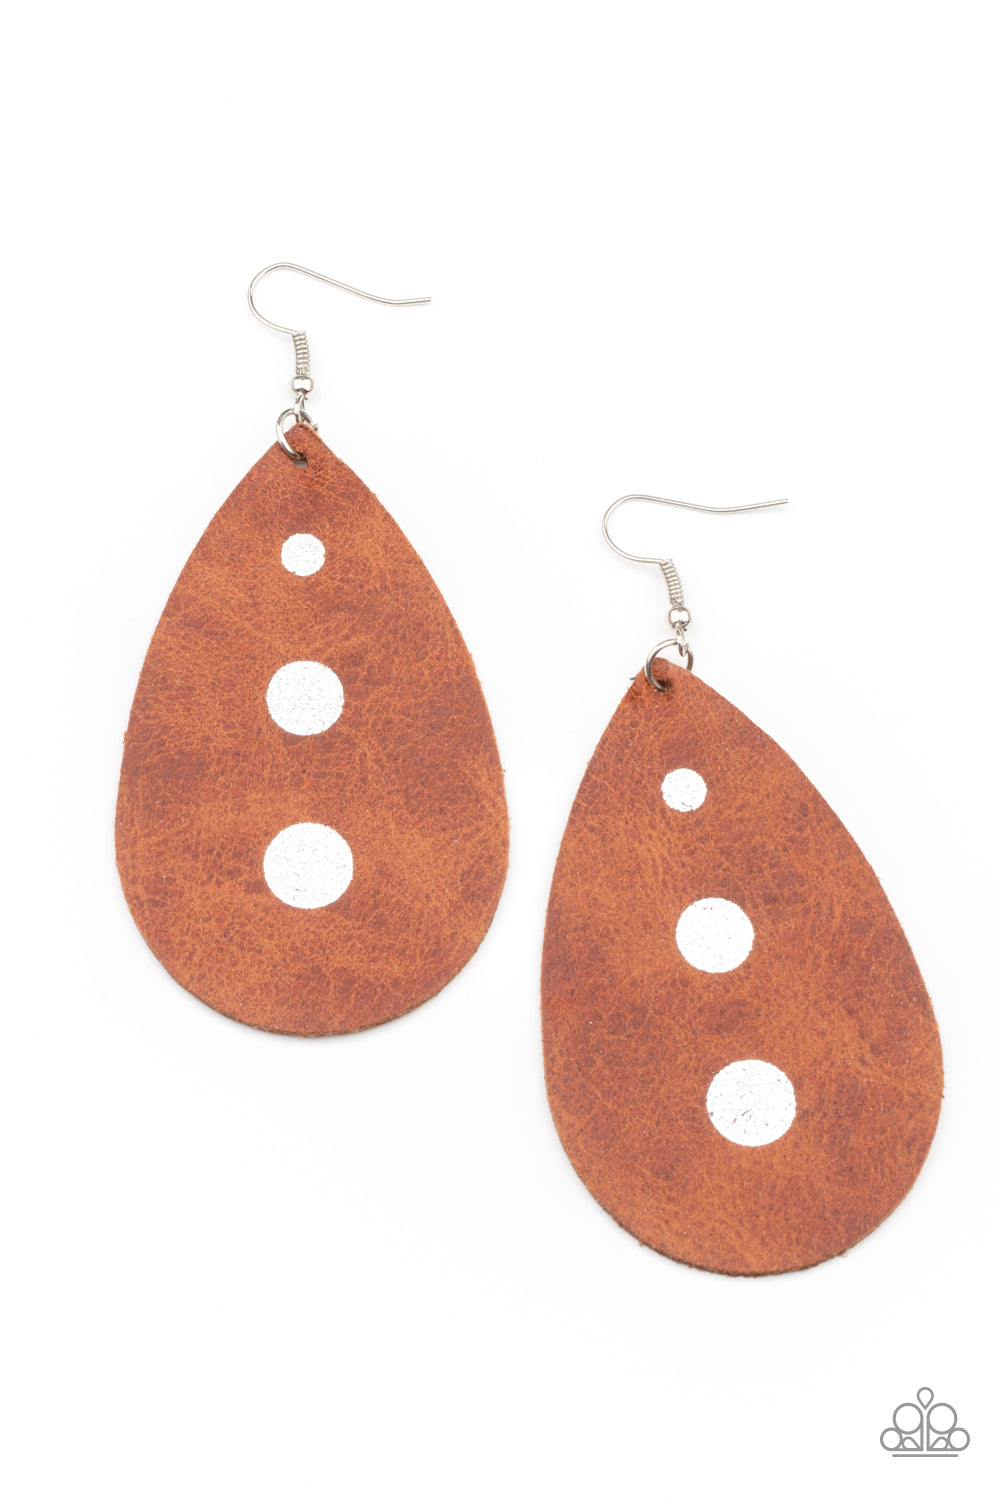 Paparazzi Rustic Torrent - Brown Earrings - A Finishing Touch Jewelry